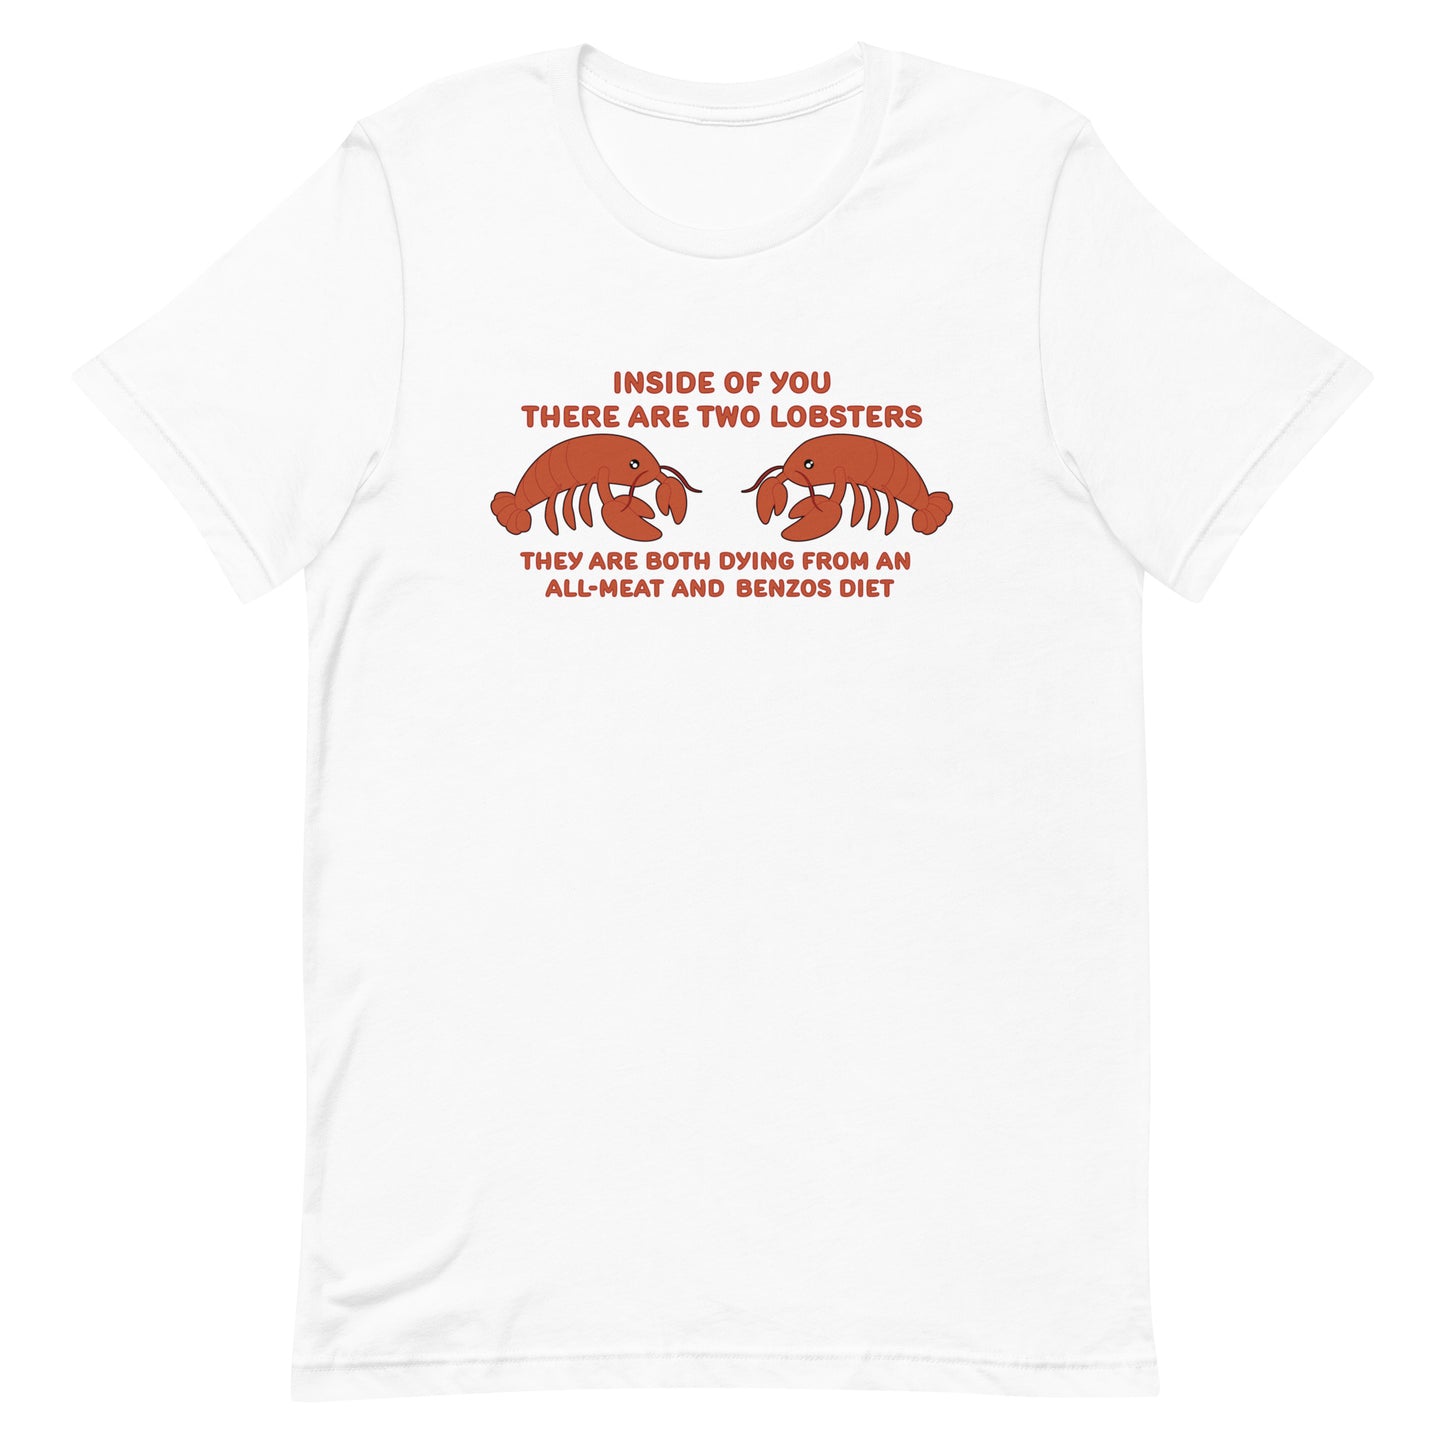 A white crewneck t-shirt featuring an illustration of two lobsters surrounded by text that reads "Inside of you there are two lobsters. They are both dying from an all-meat and benzos diet"